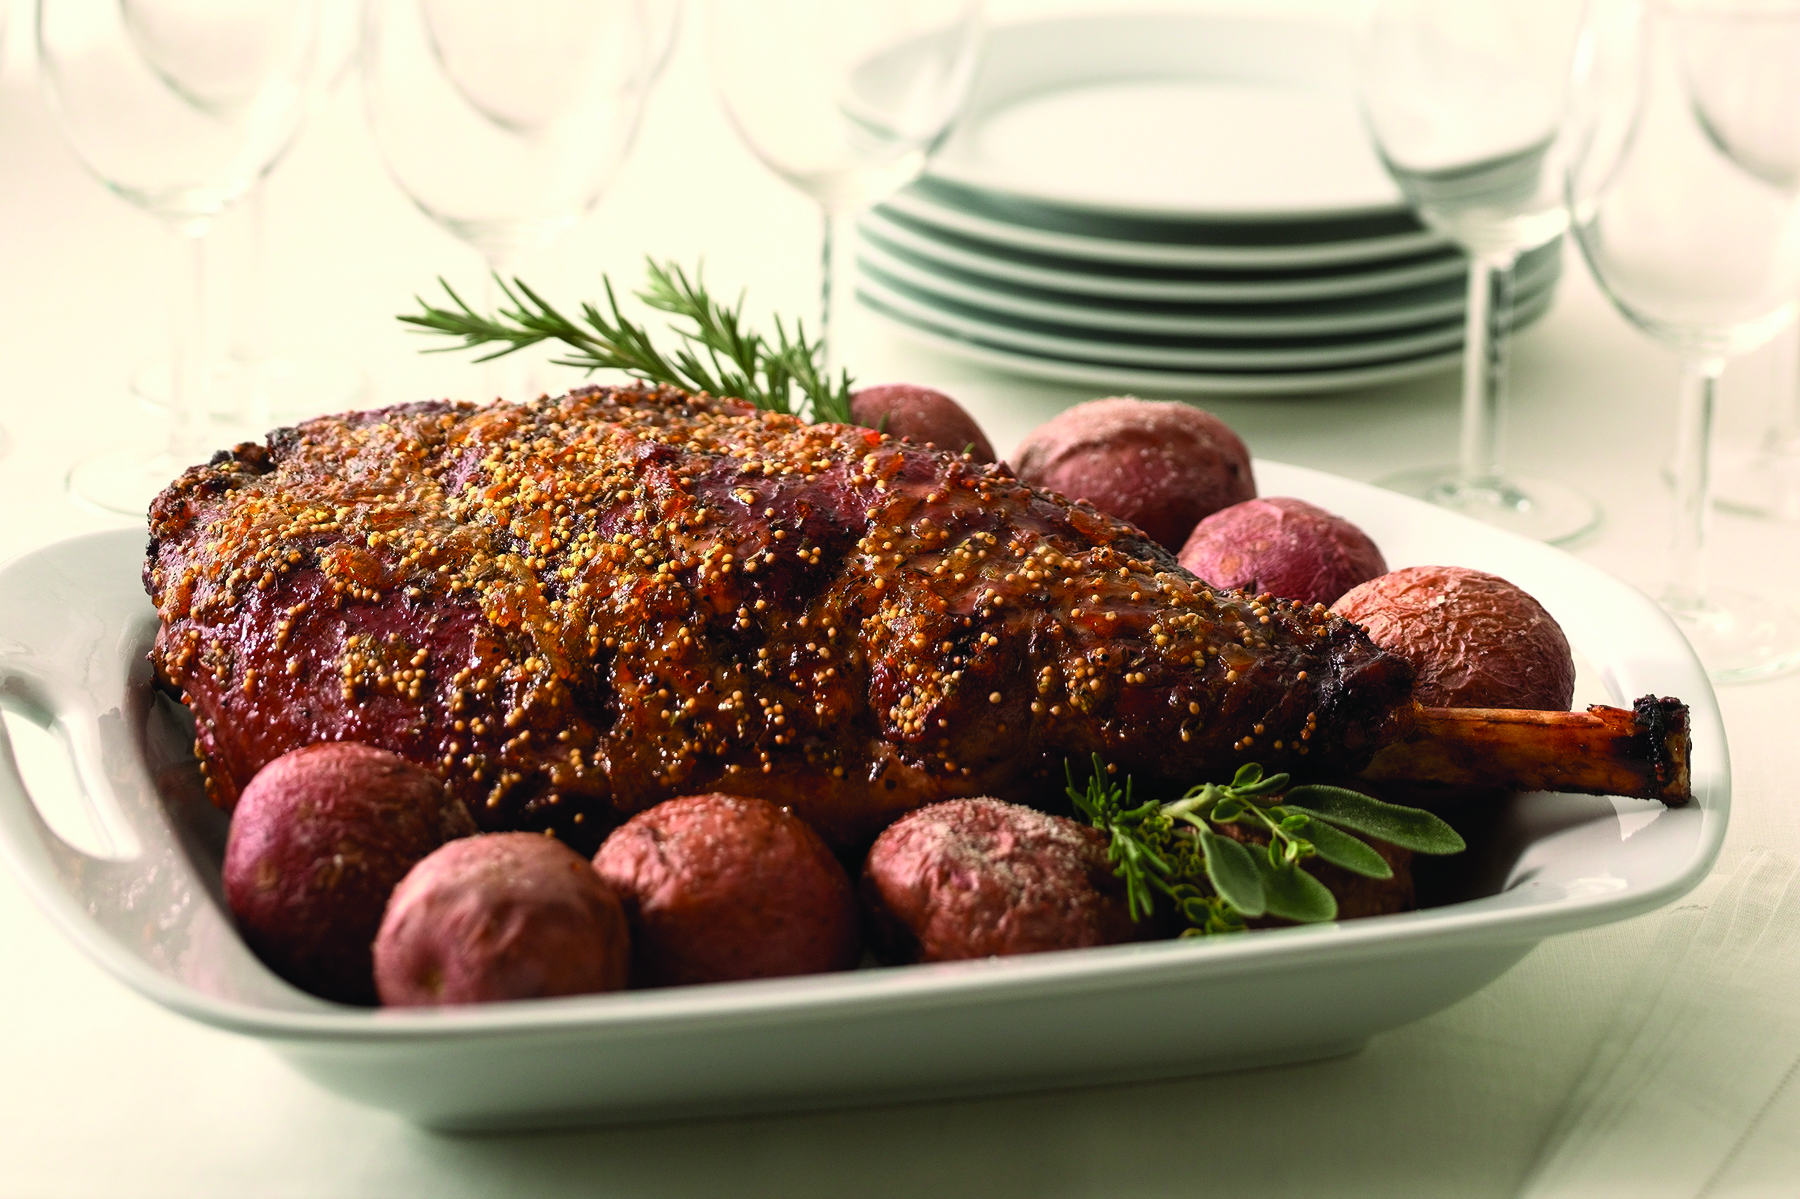 Nothing says love like a gorgeous and delicious meal, especially one made with Leg of Lamb and crisp and creamy roasted red potatoes. Gather your family around the table and enjoy.